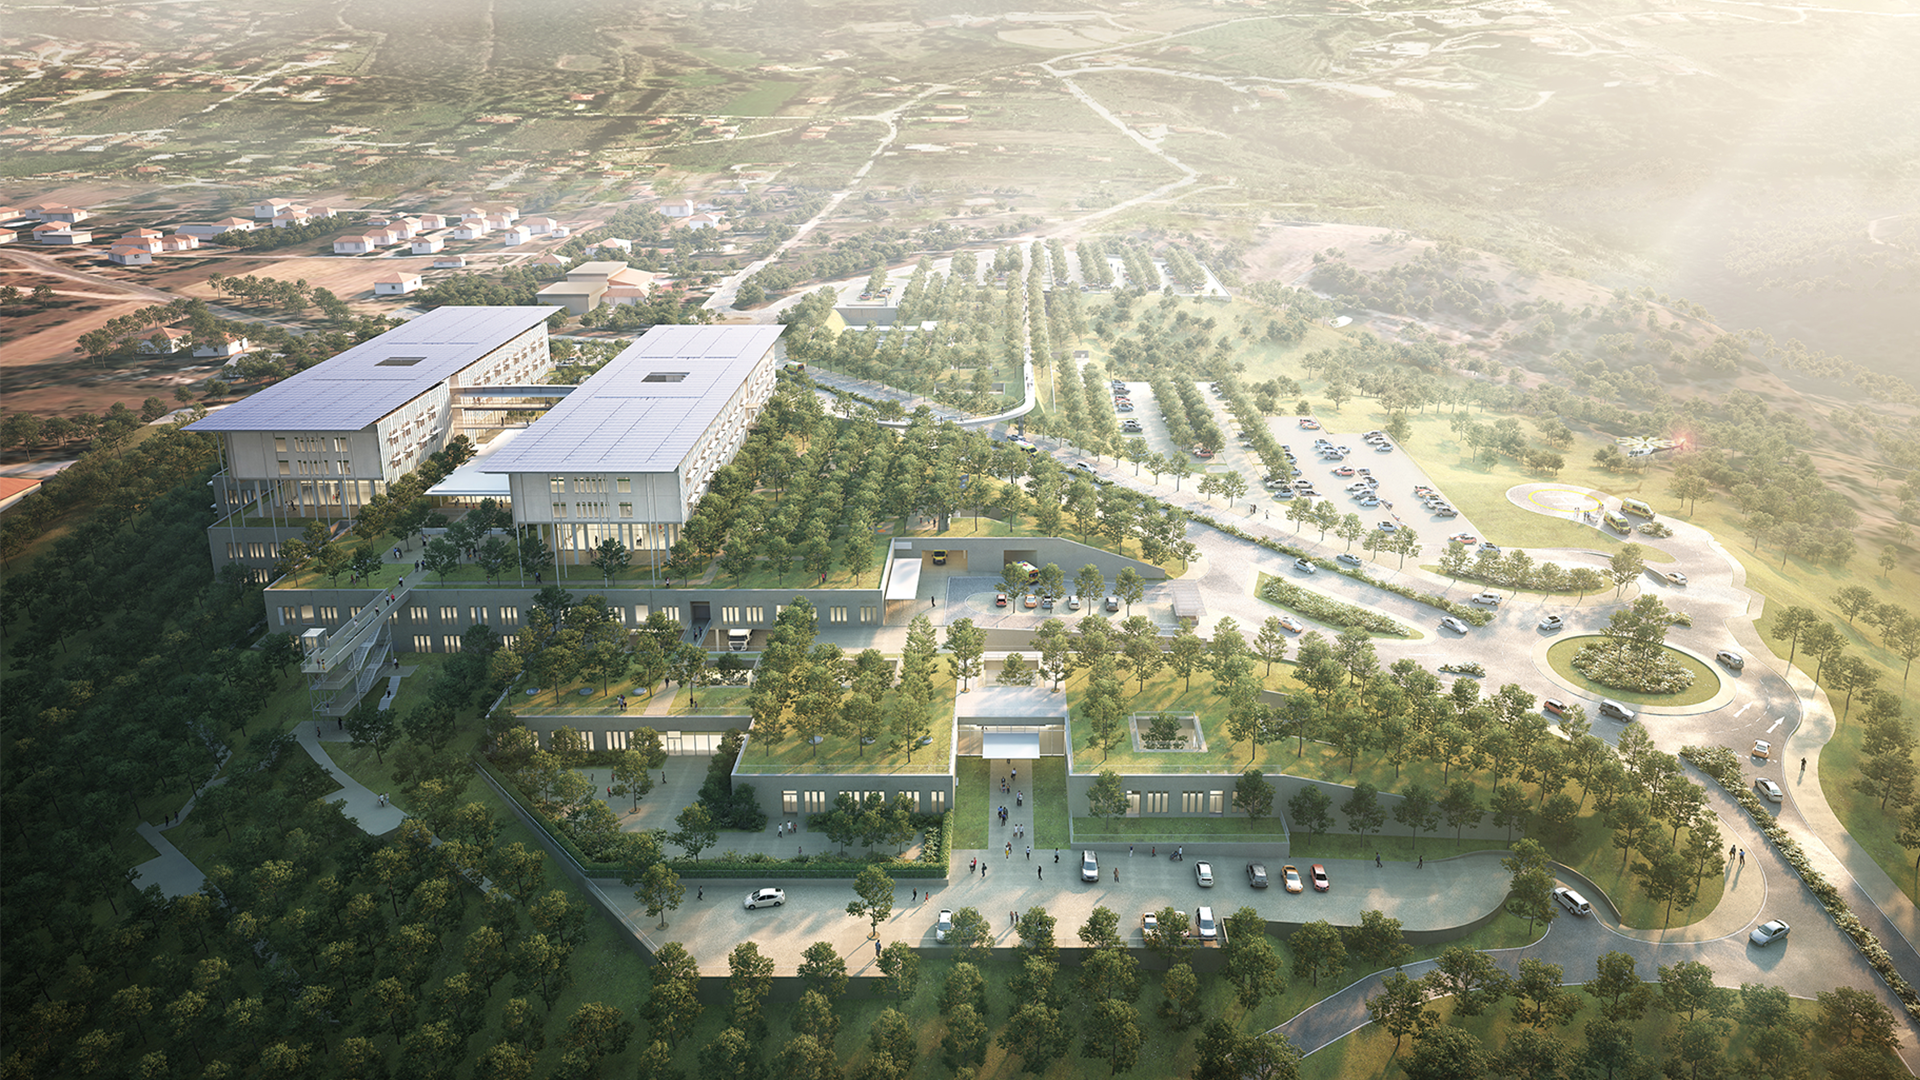 Construction process of the New General Hospital Komotini - Stavros Niarchos Foundation